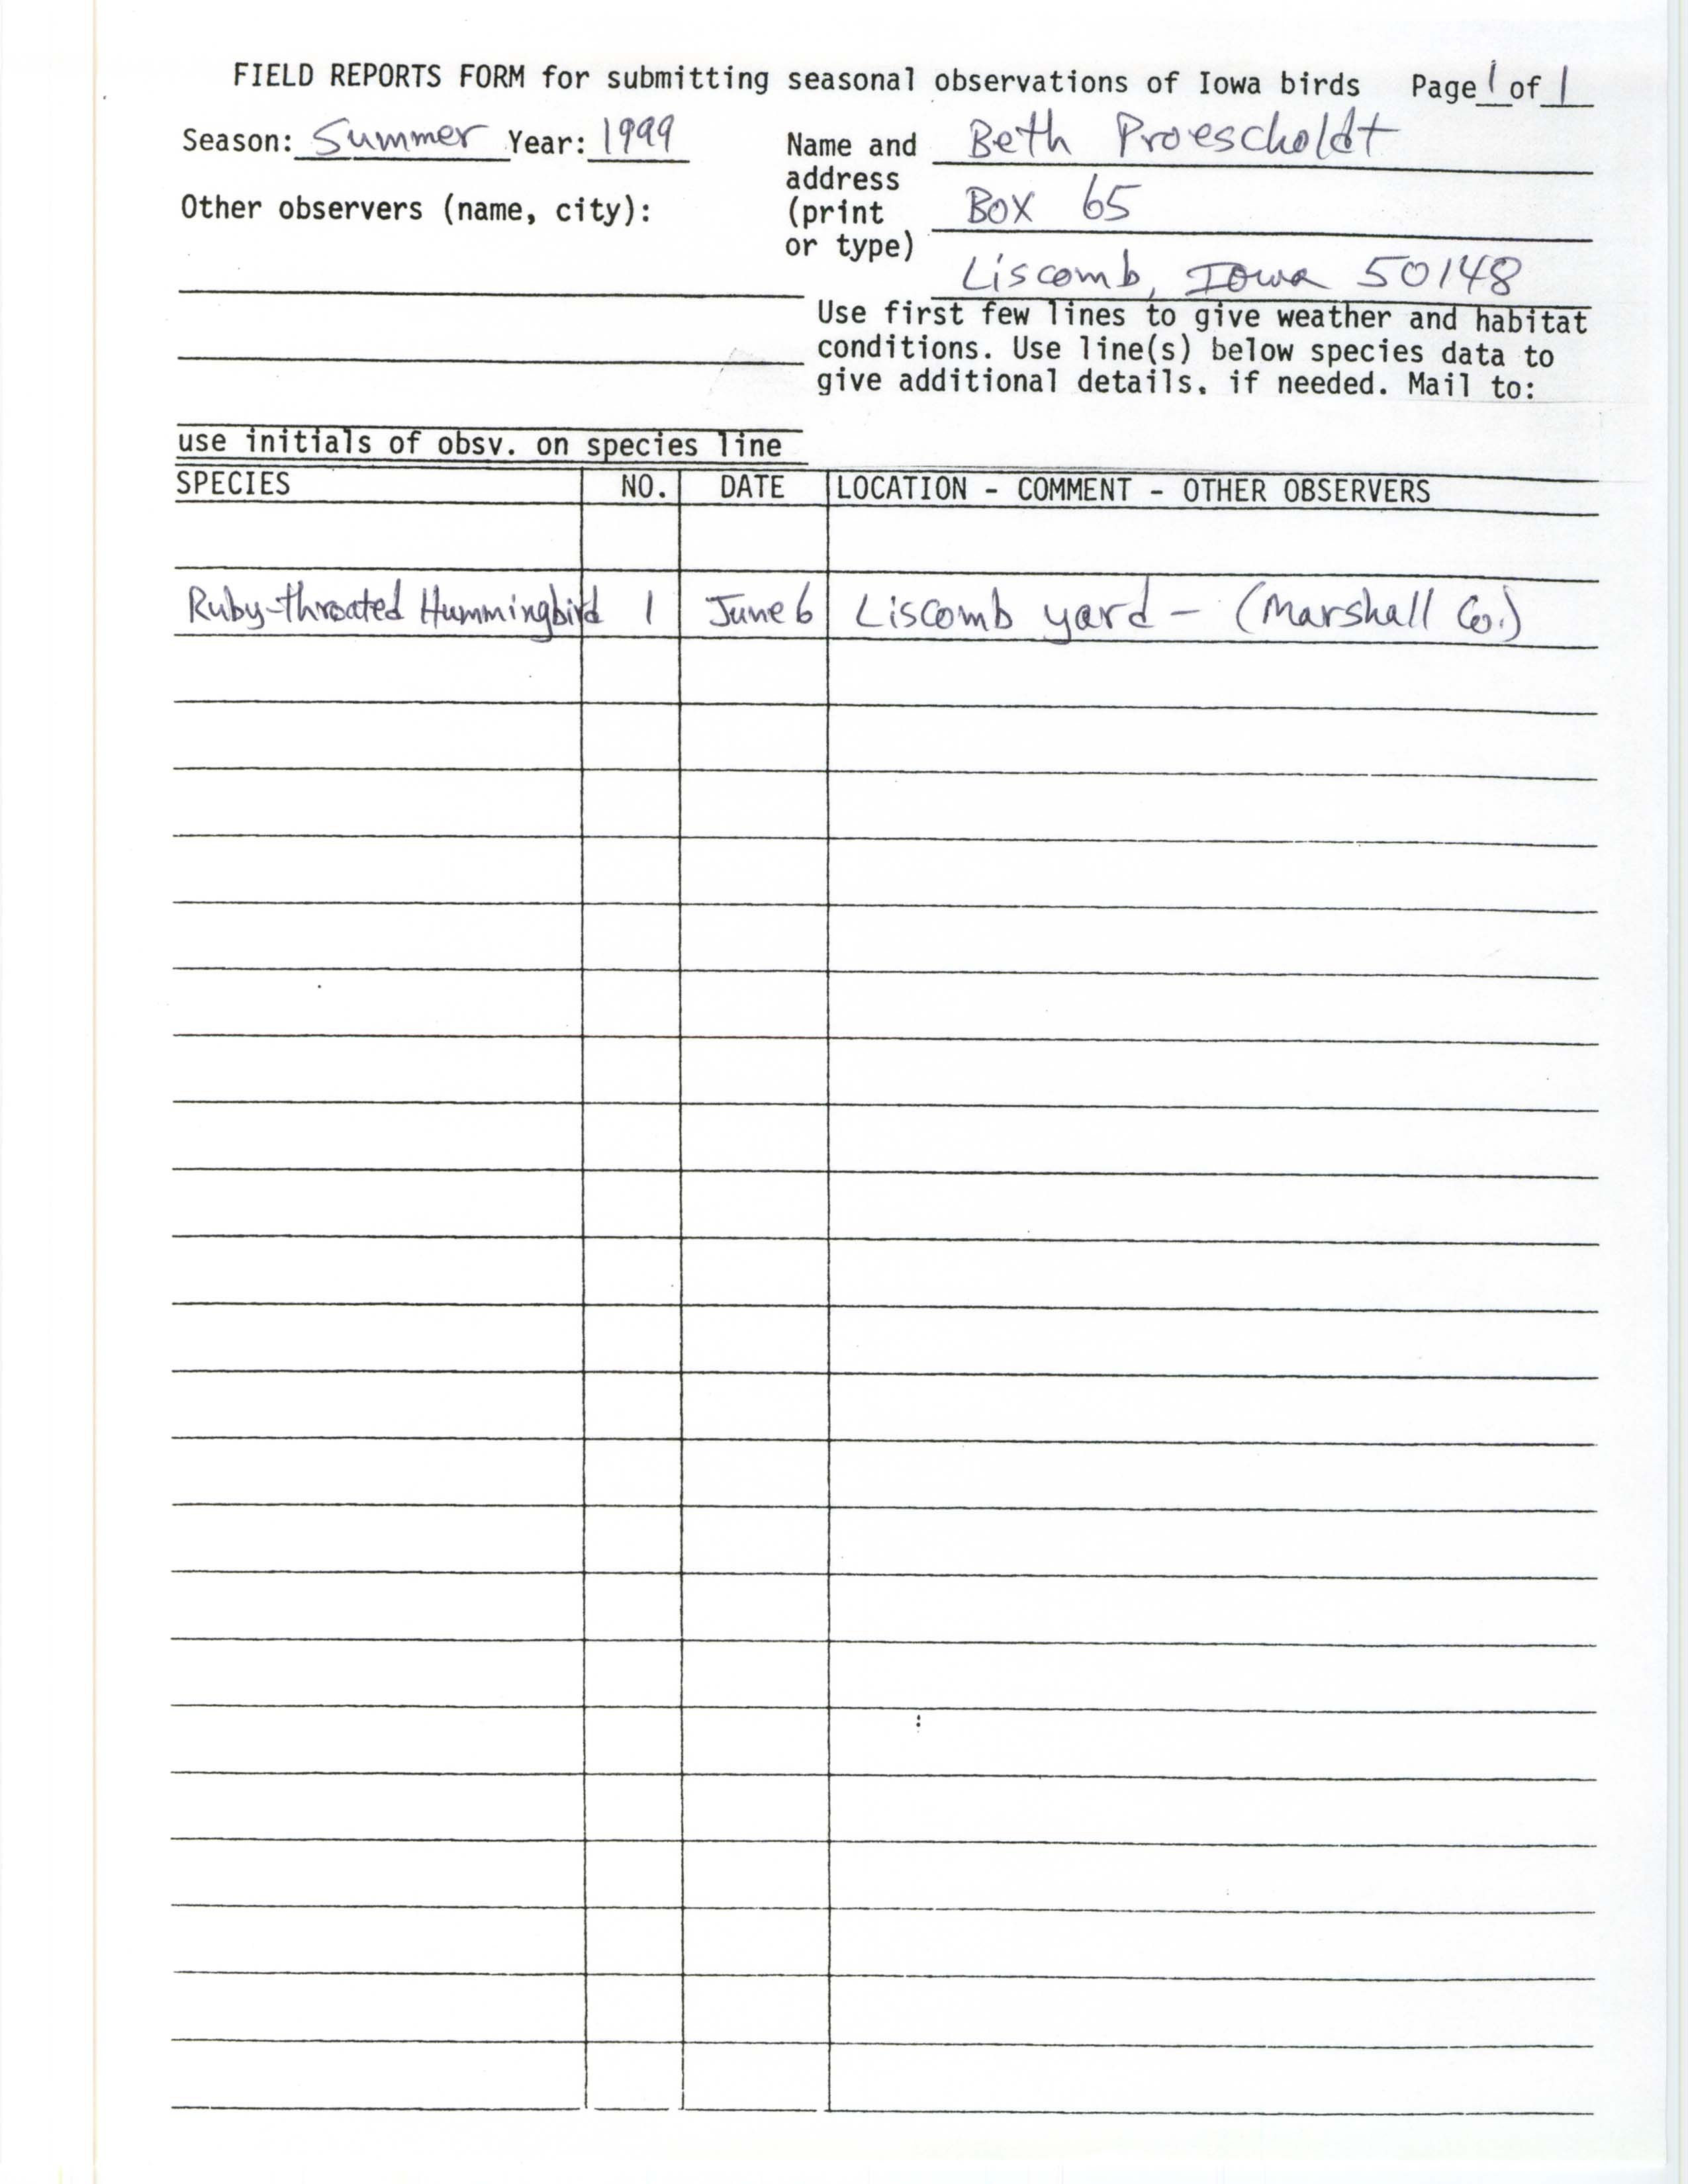 Field reports form for submitting seasonal observations of Iowa birds, summer 1999, Beth Proescholdt